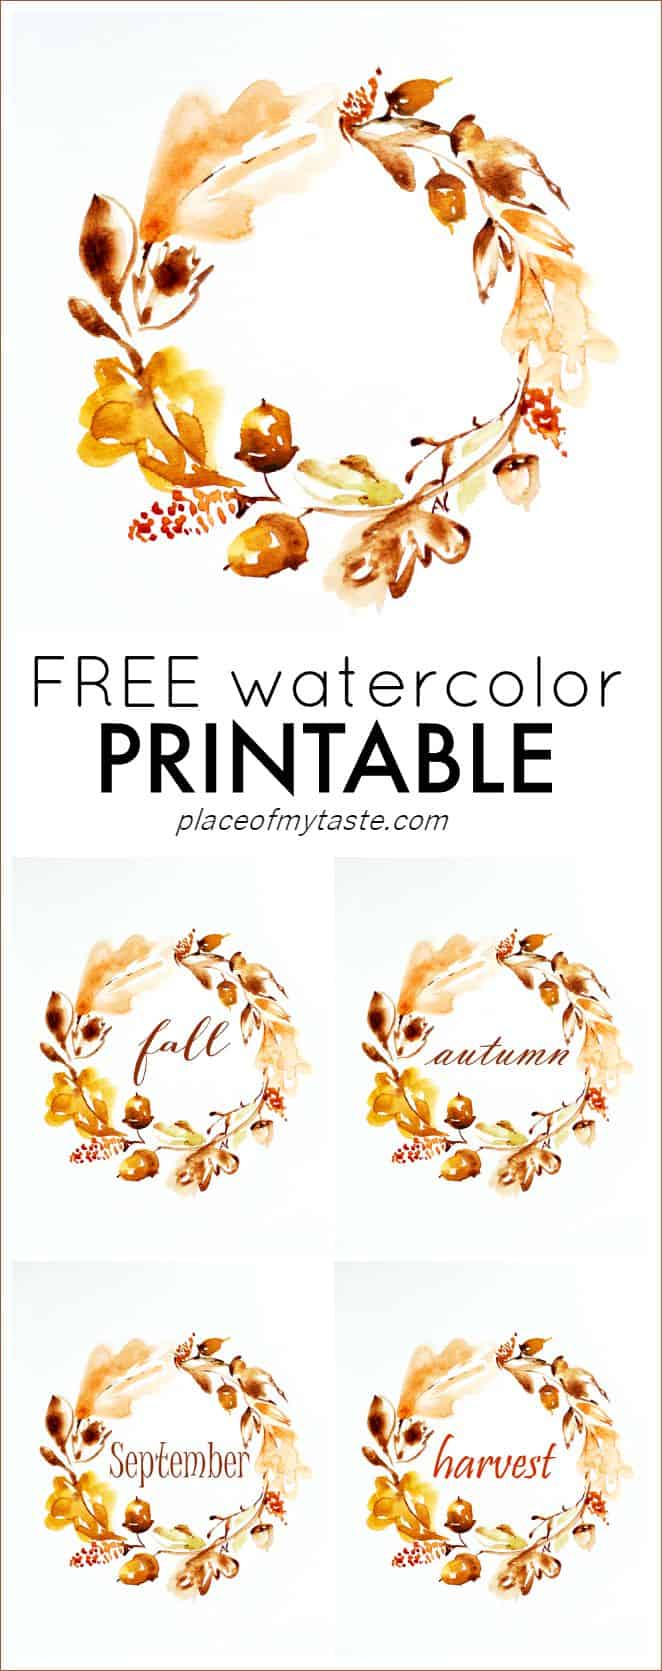 FREE WATERCOLOR THANKSGIVING PRINTABLE PLACE OF MY TASTE